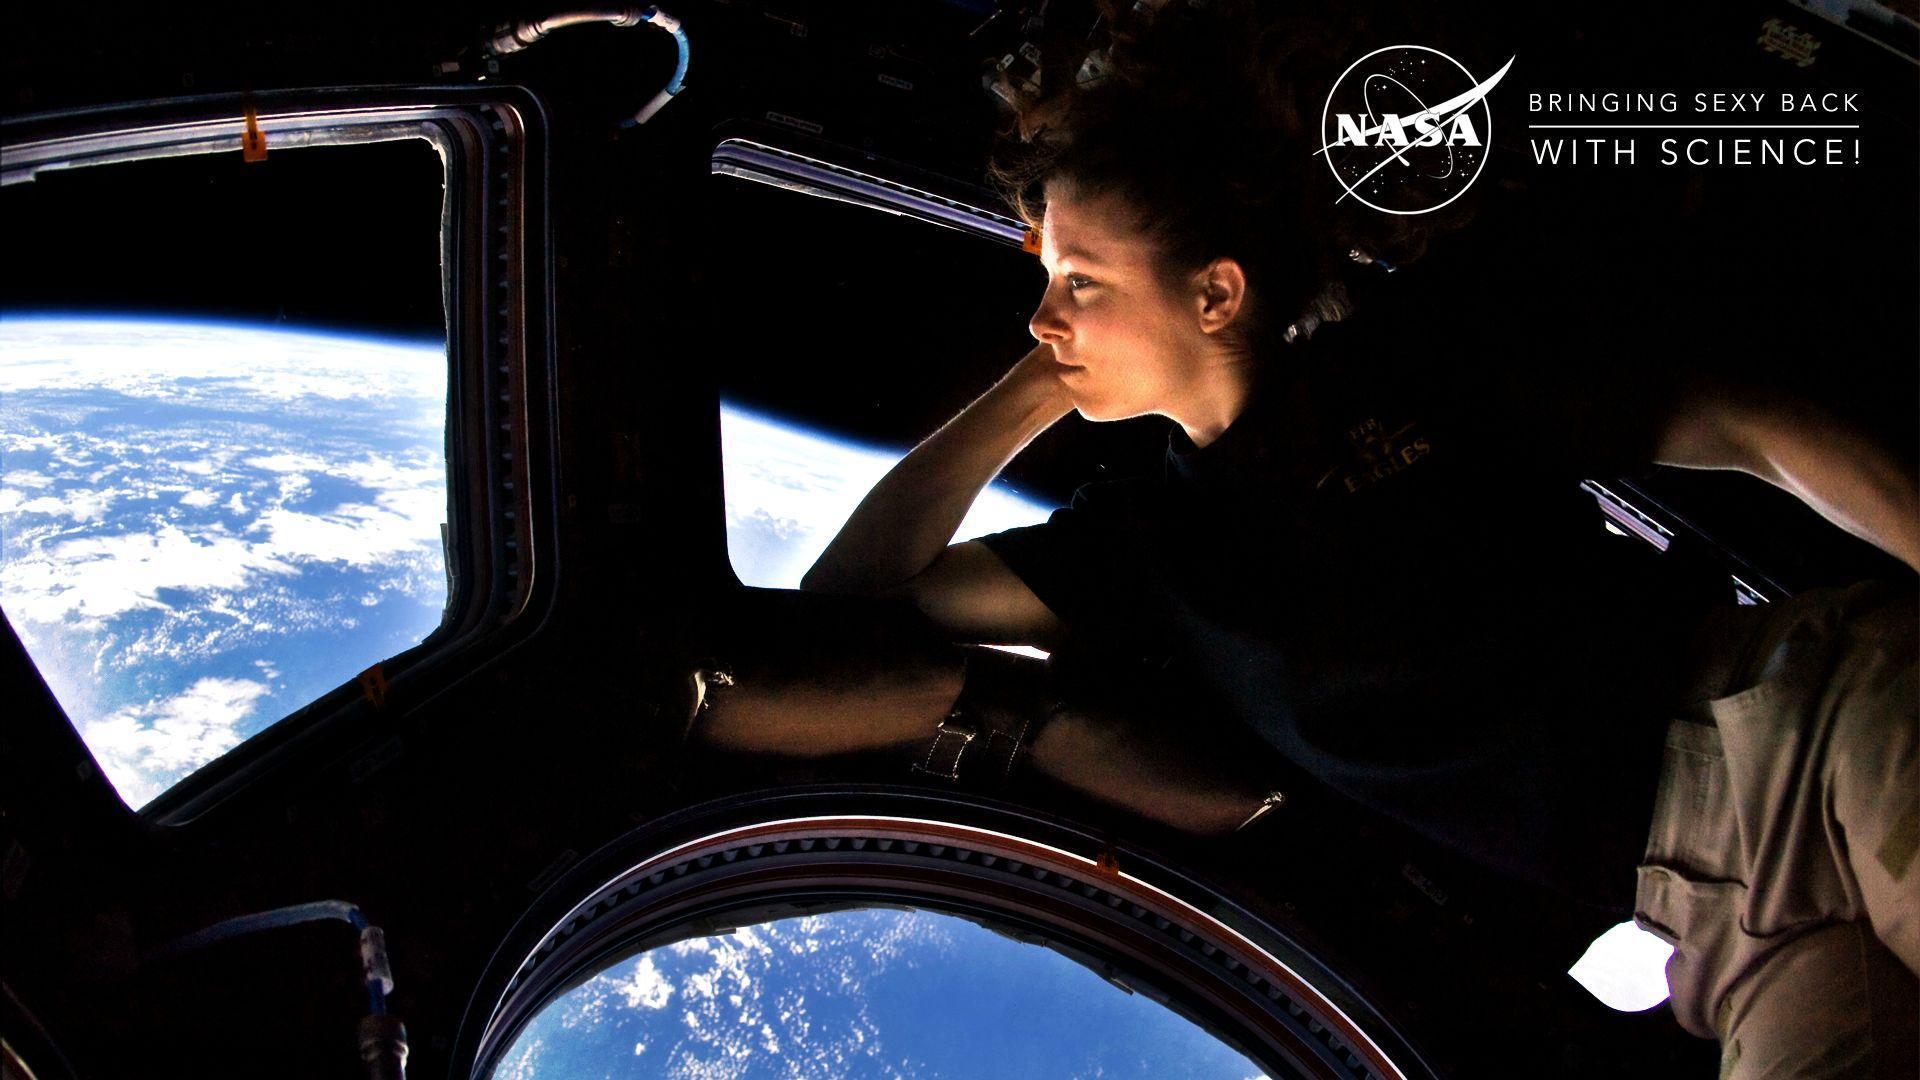 Self portrait of Tracy Caldwell Dyson in the Cupola module